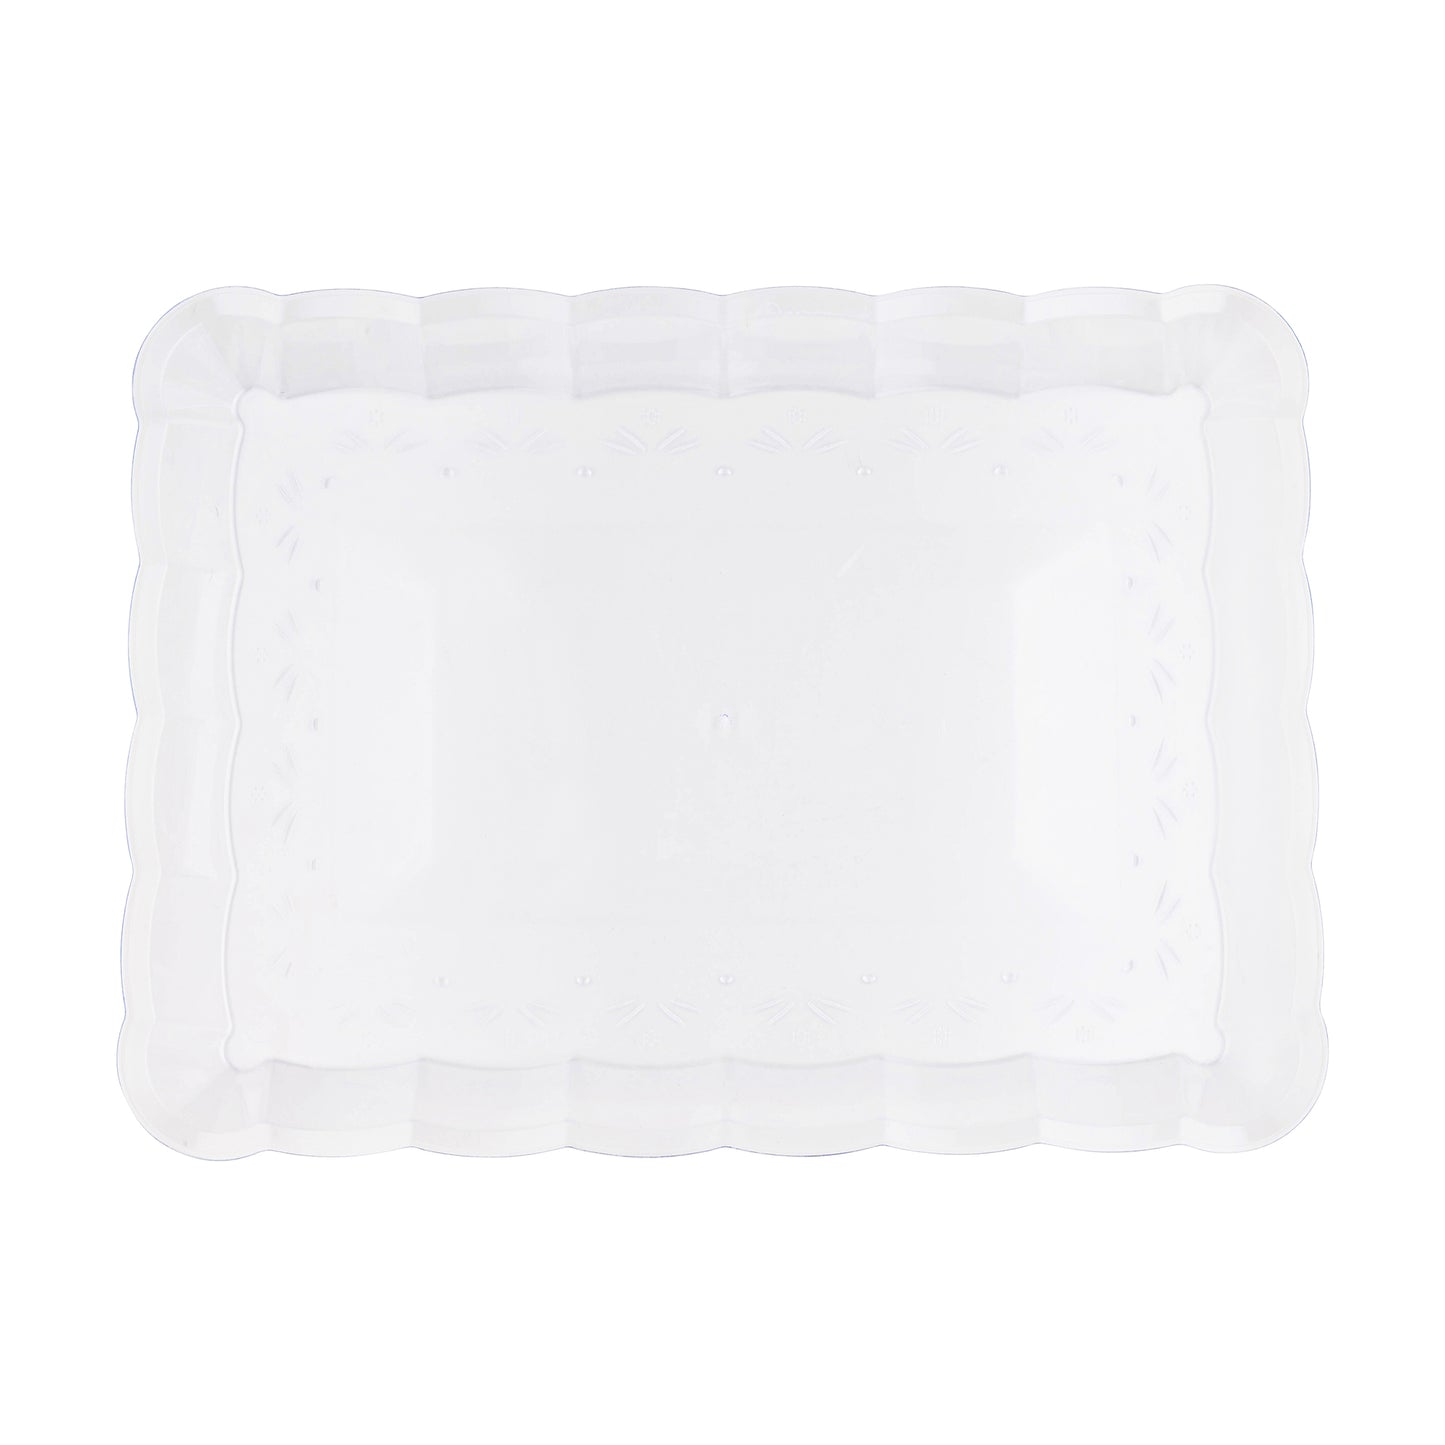 11" x 16" Clear Rectangular with Groove Rim Disposable Plastic Serving Trays